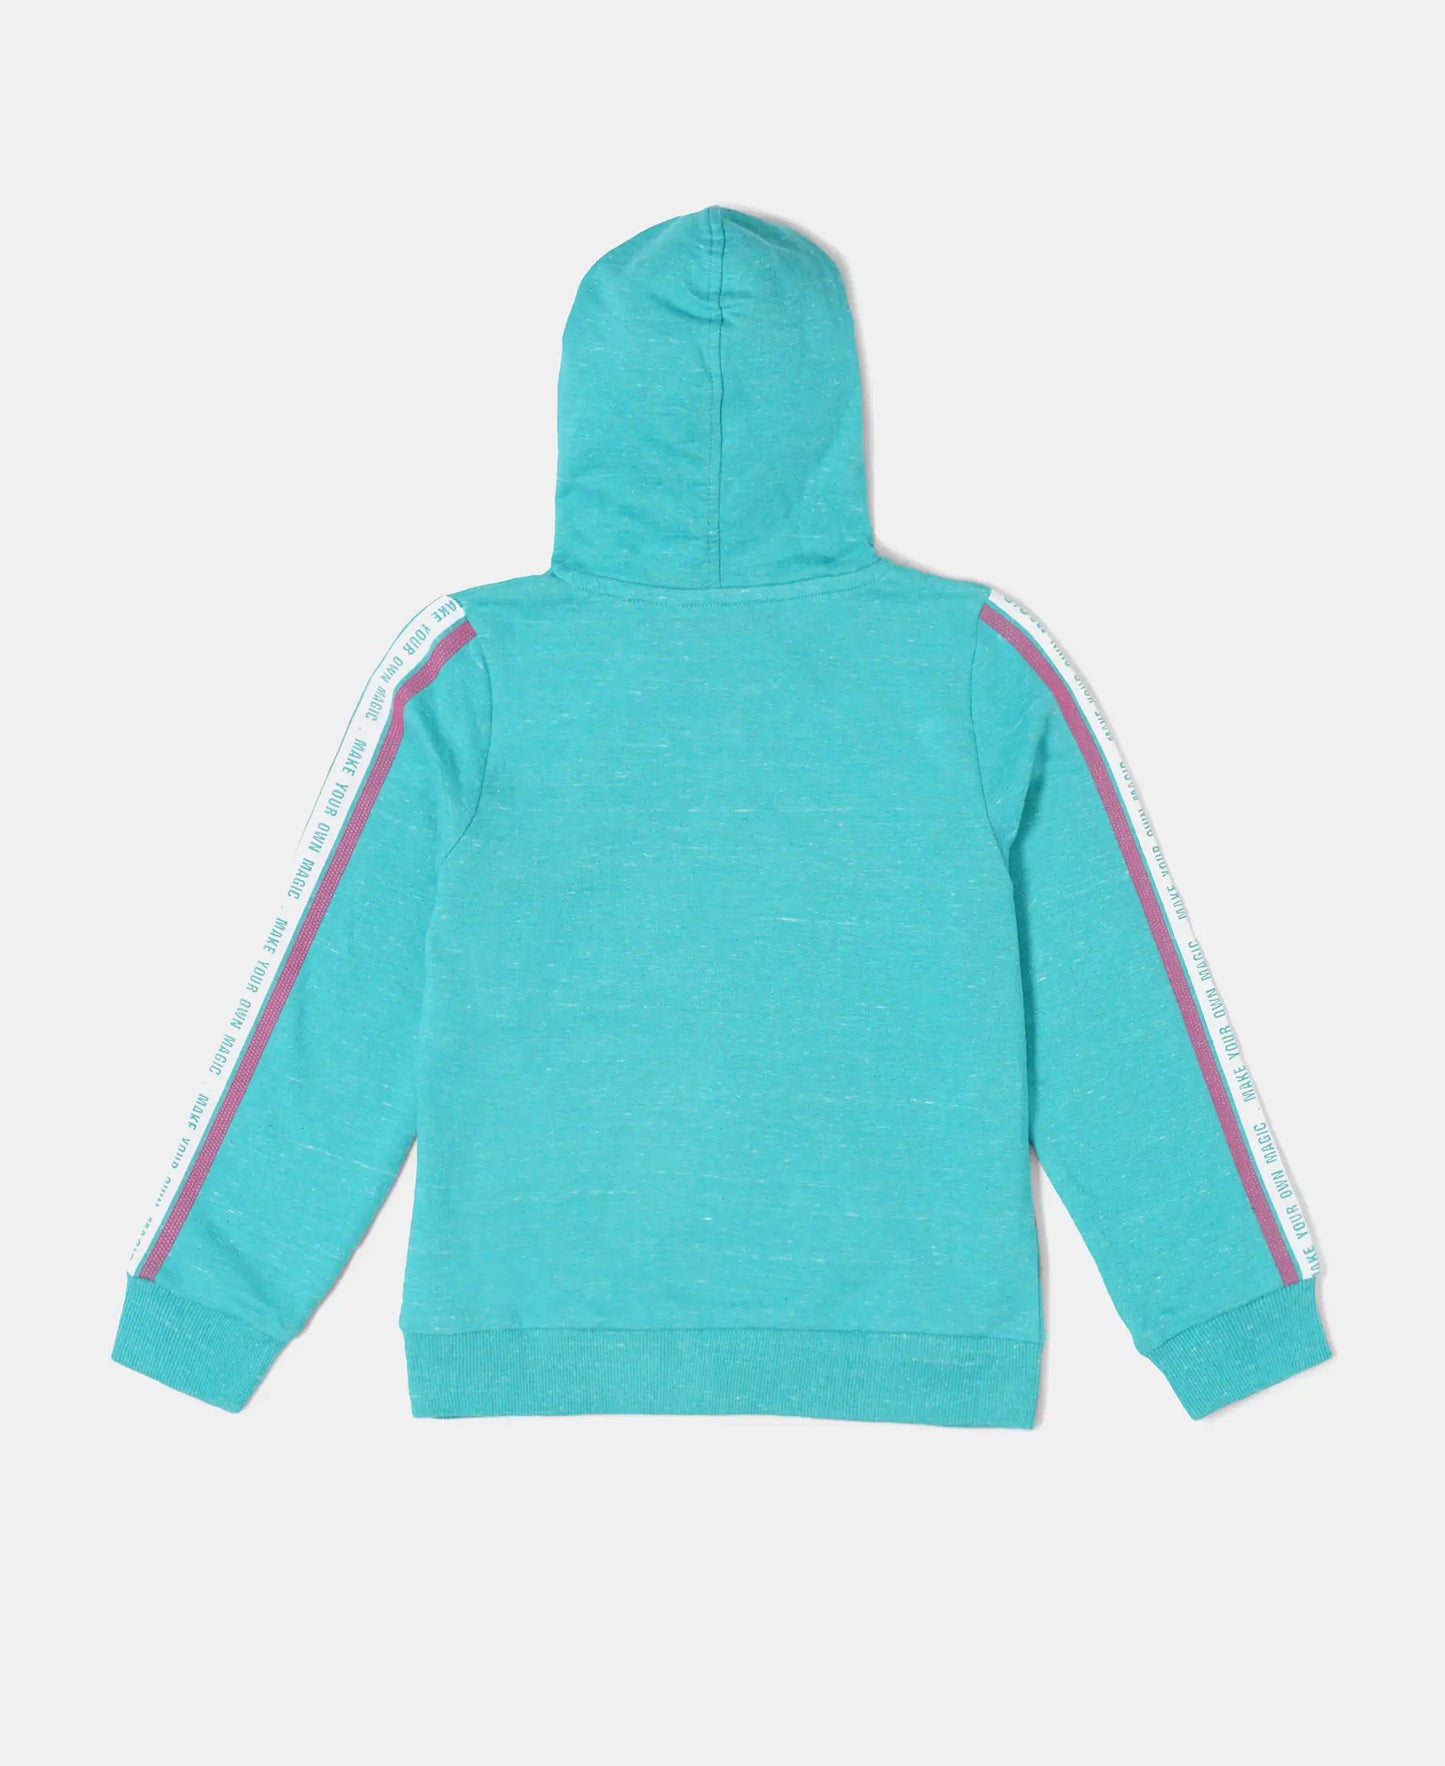 Super Combed Cotton French Terry Graphic Printed Hoodie Jacket - Paradise Teal Snow Melange-2